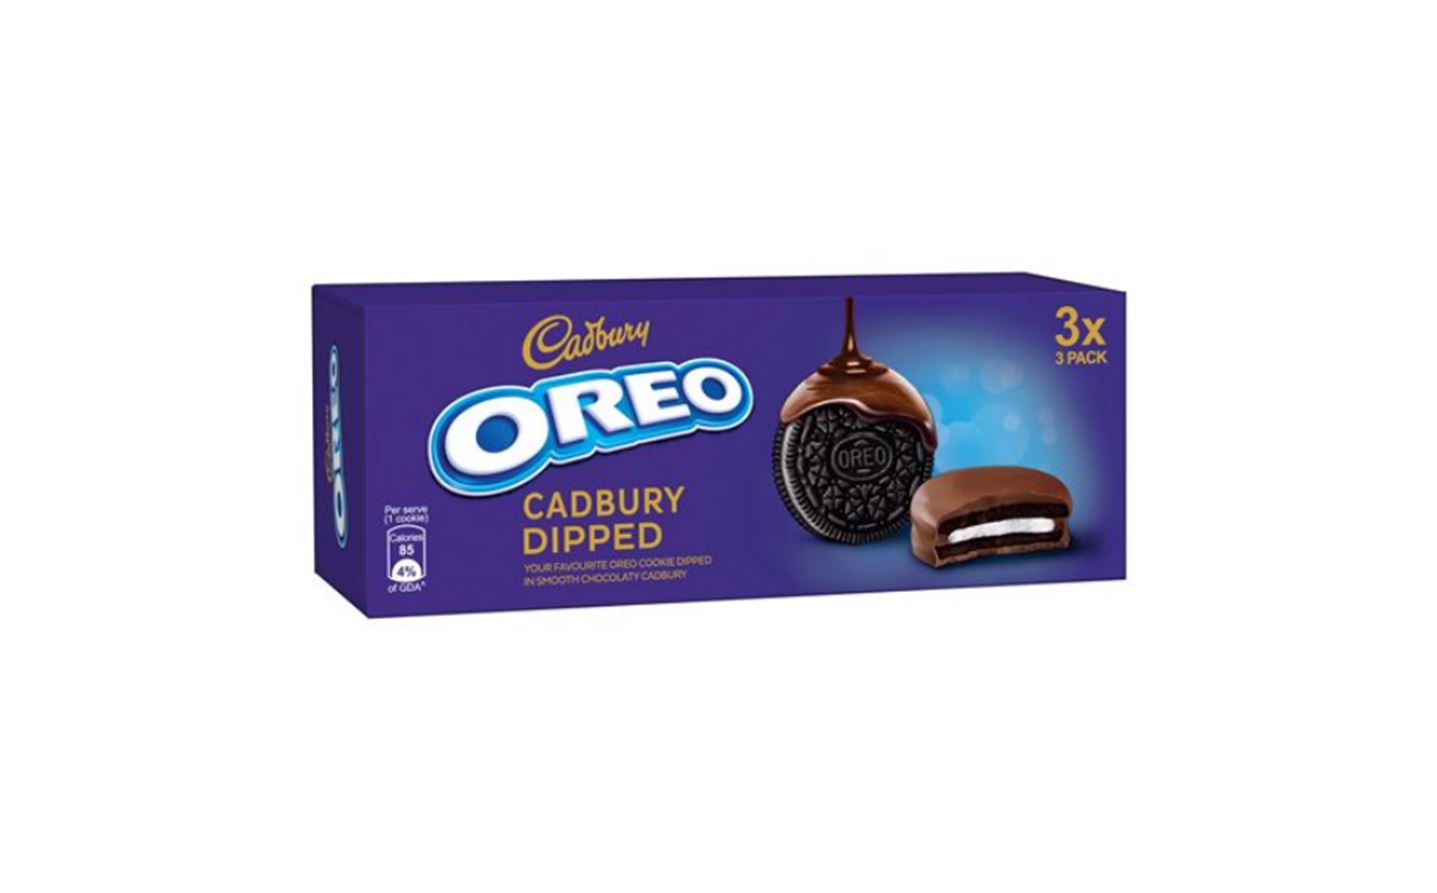 first impressions of chocolate dipped oreo cookies